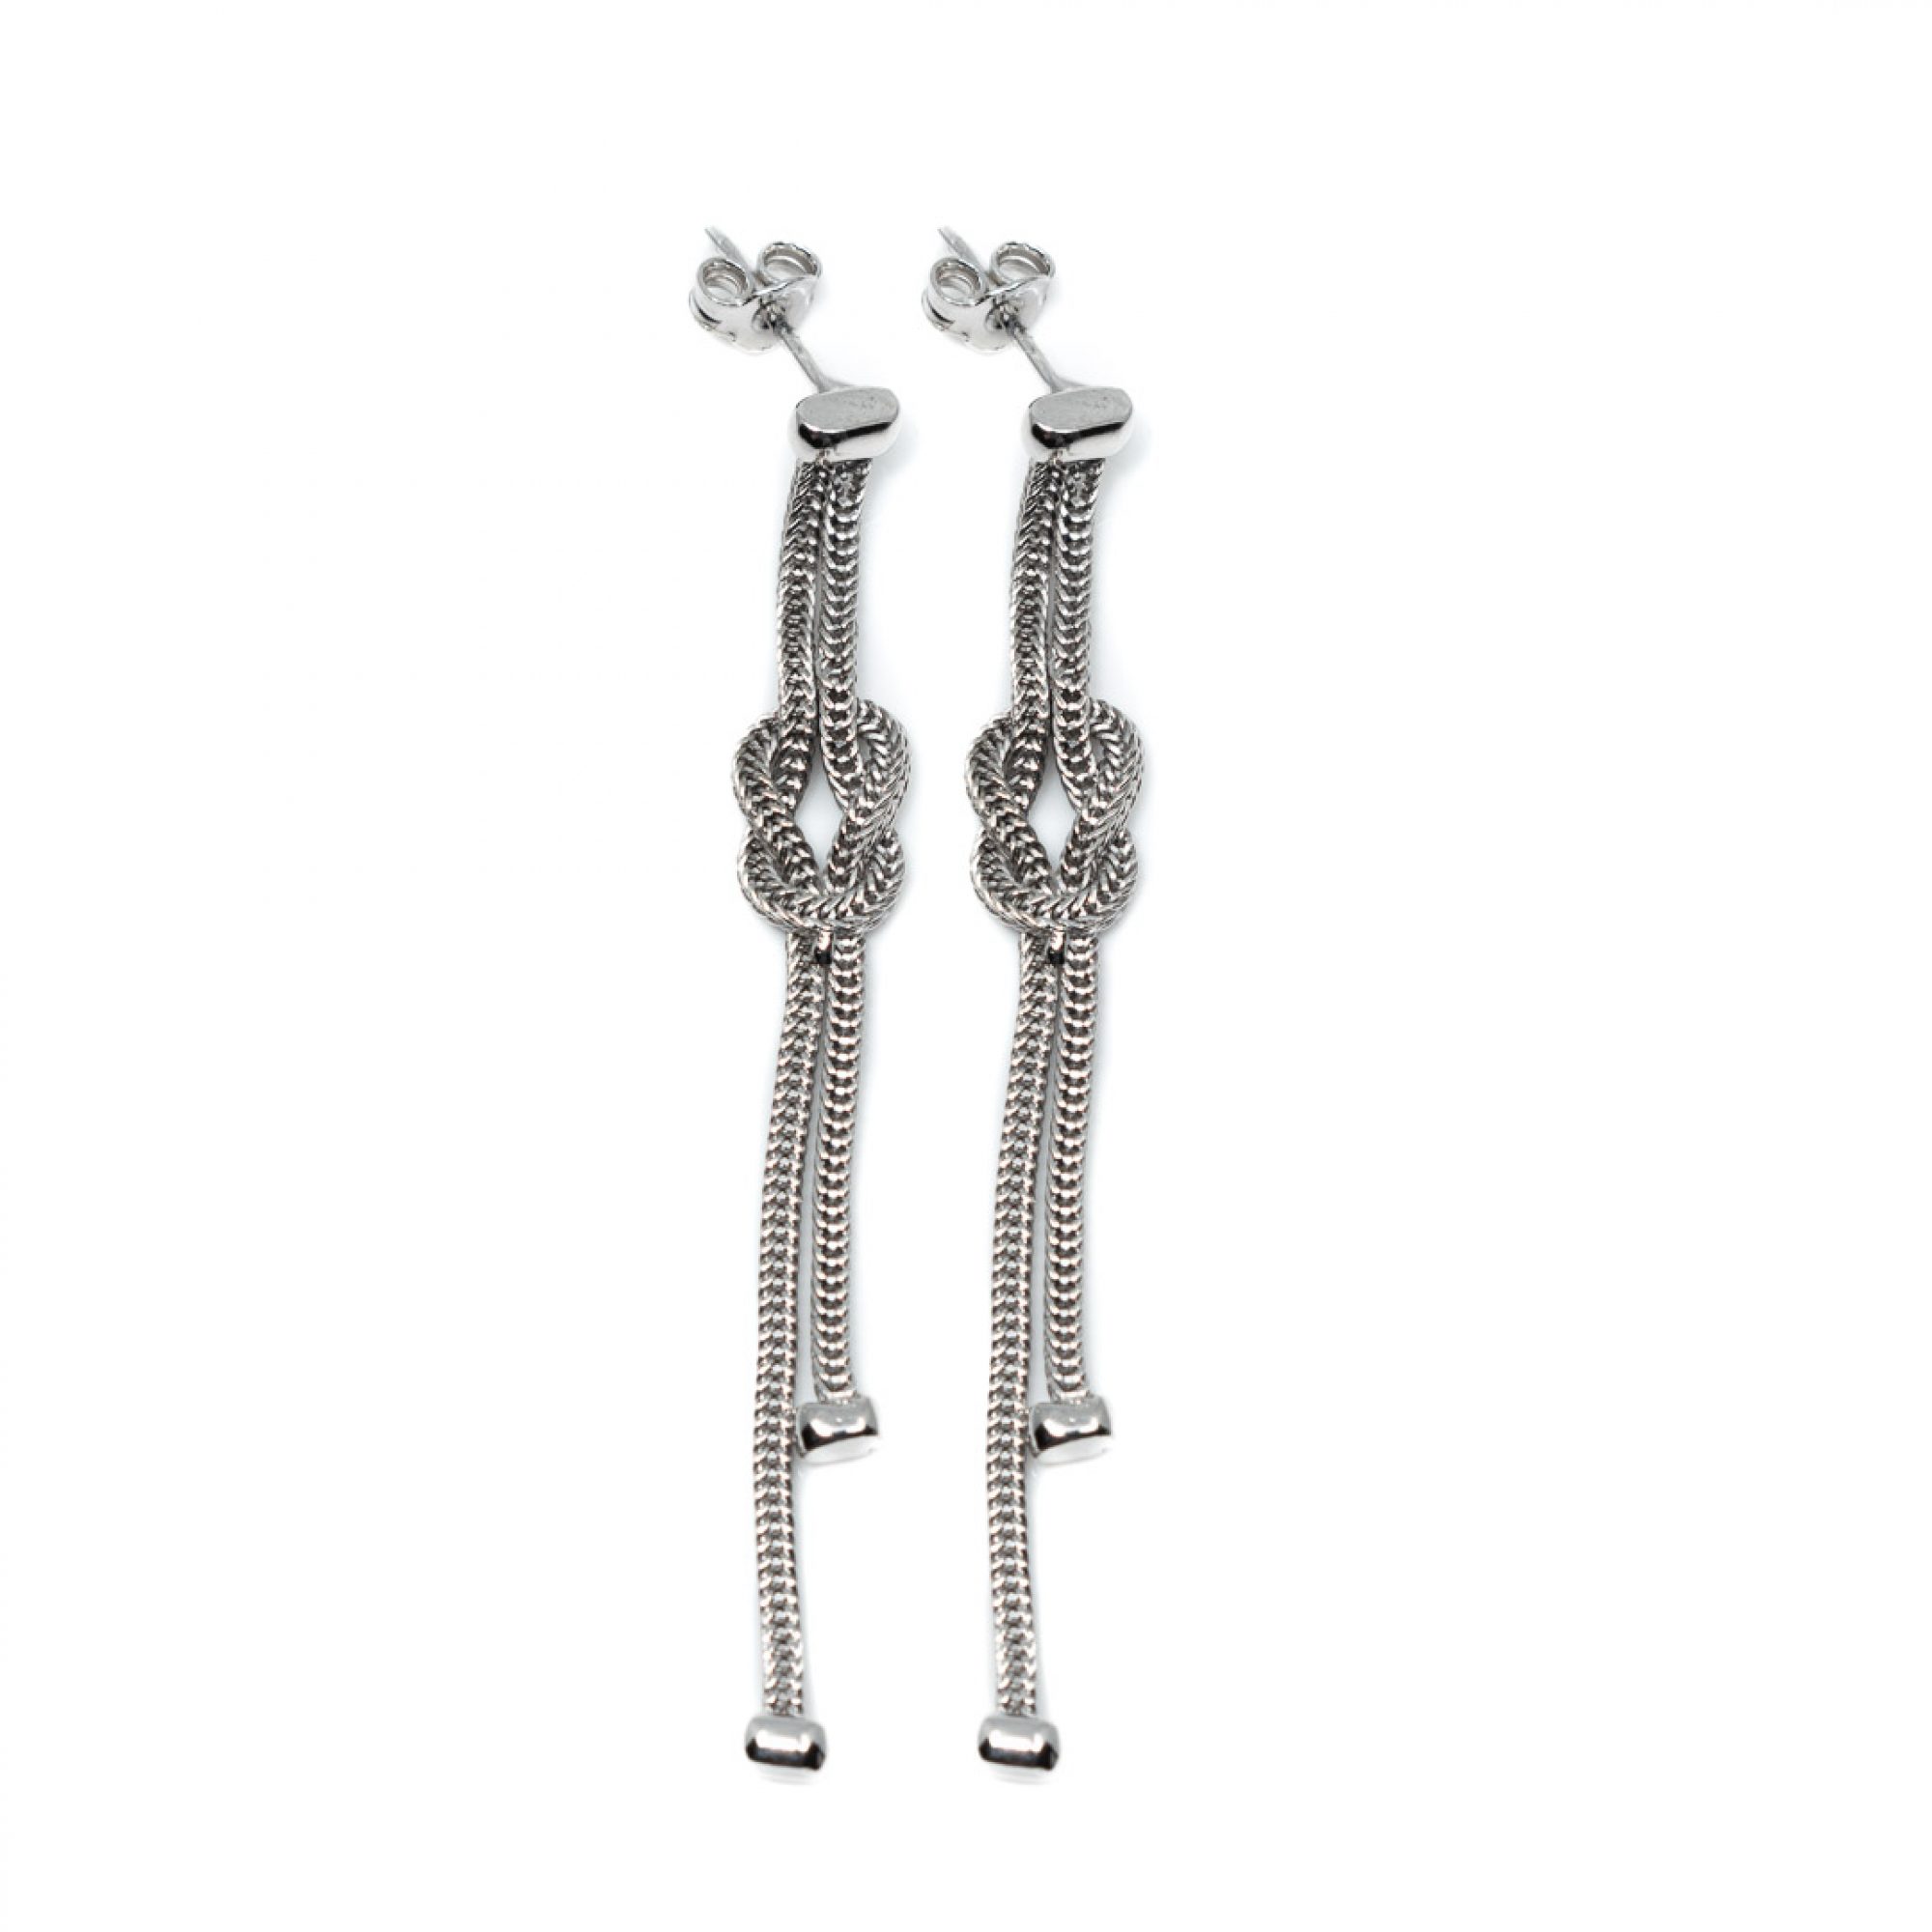 Chain earrings platinum plated